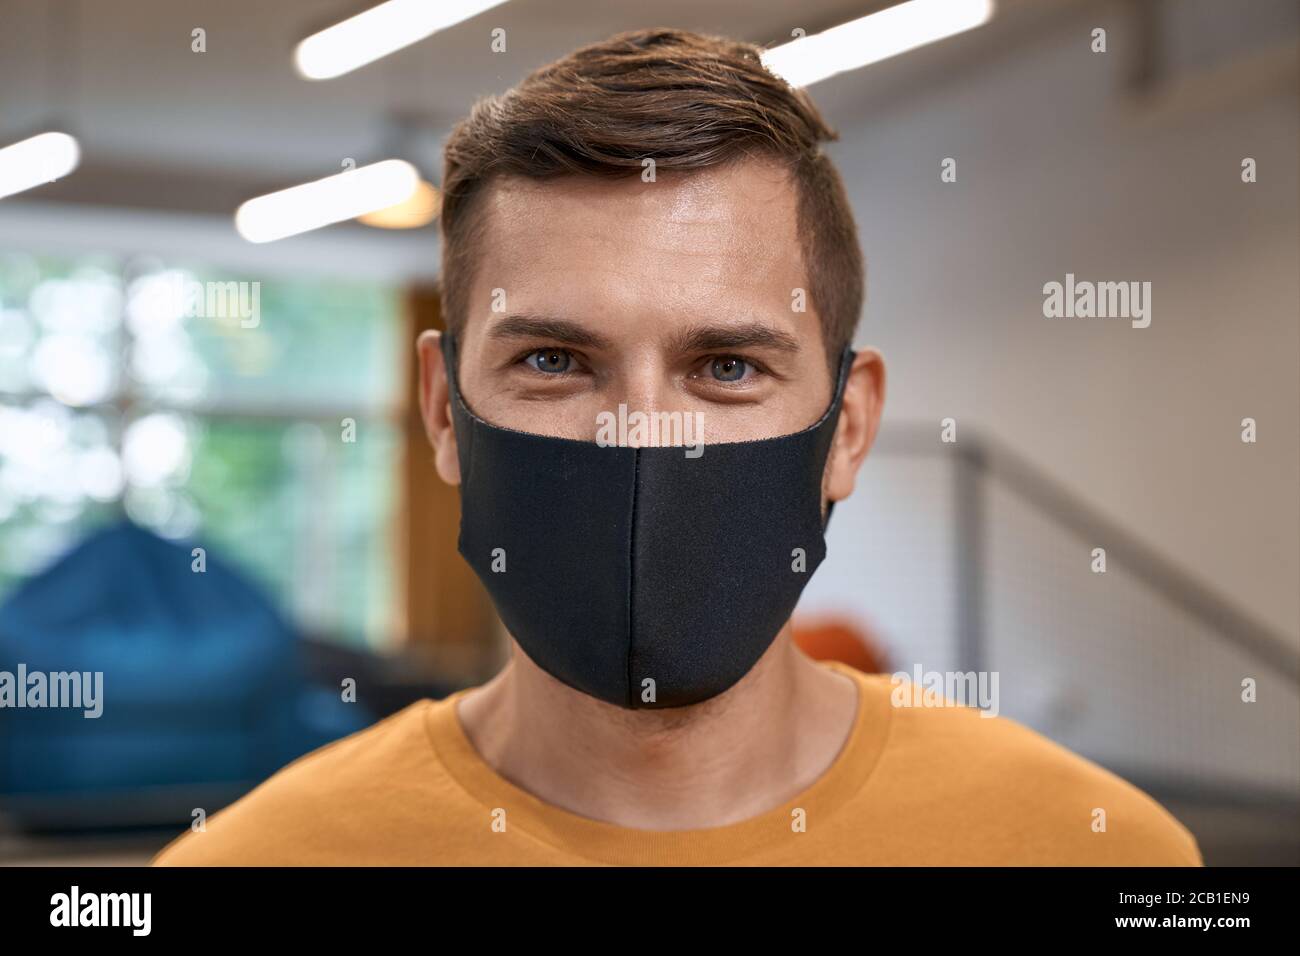 Back to office. Close up portrait of young man, male office worker wearing black protective mask and looking at camera, standing in the modern office Stock Photo